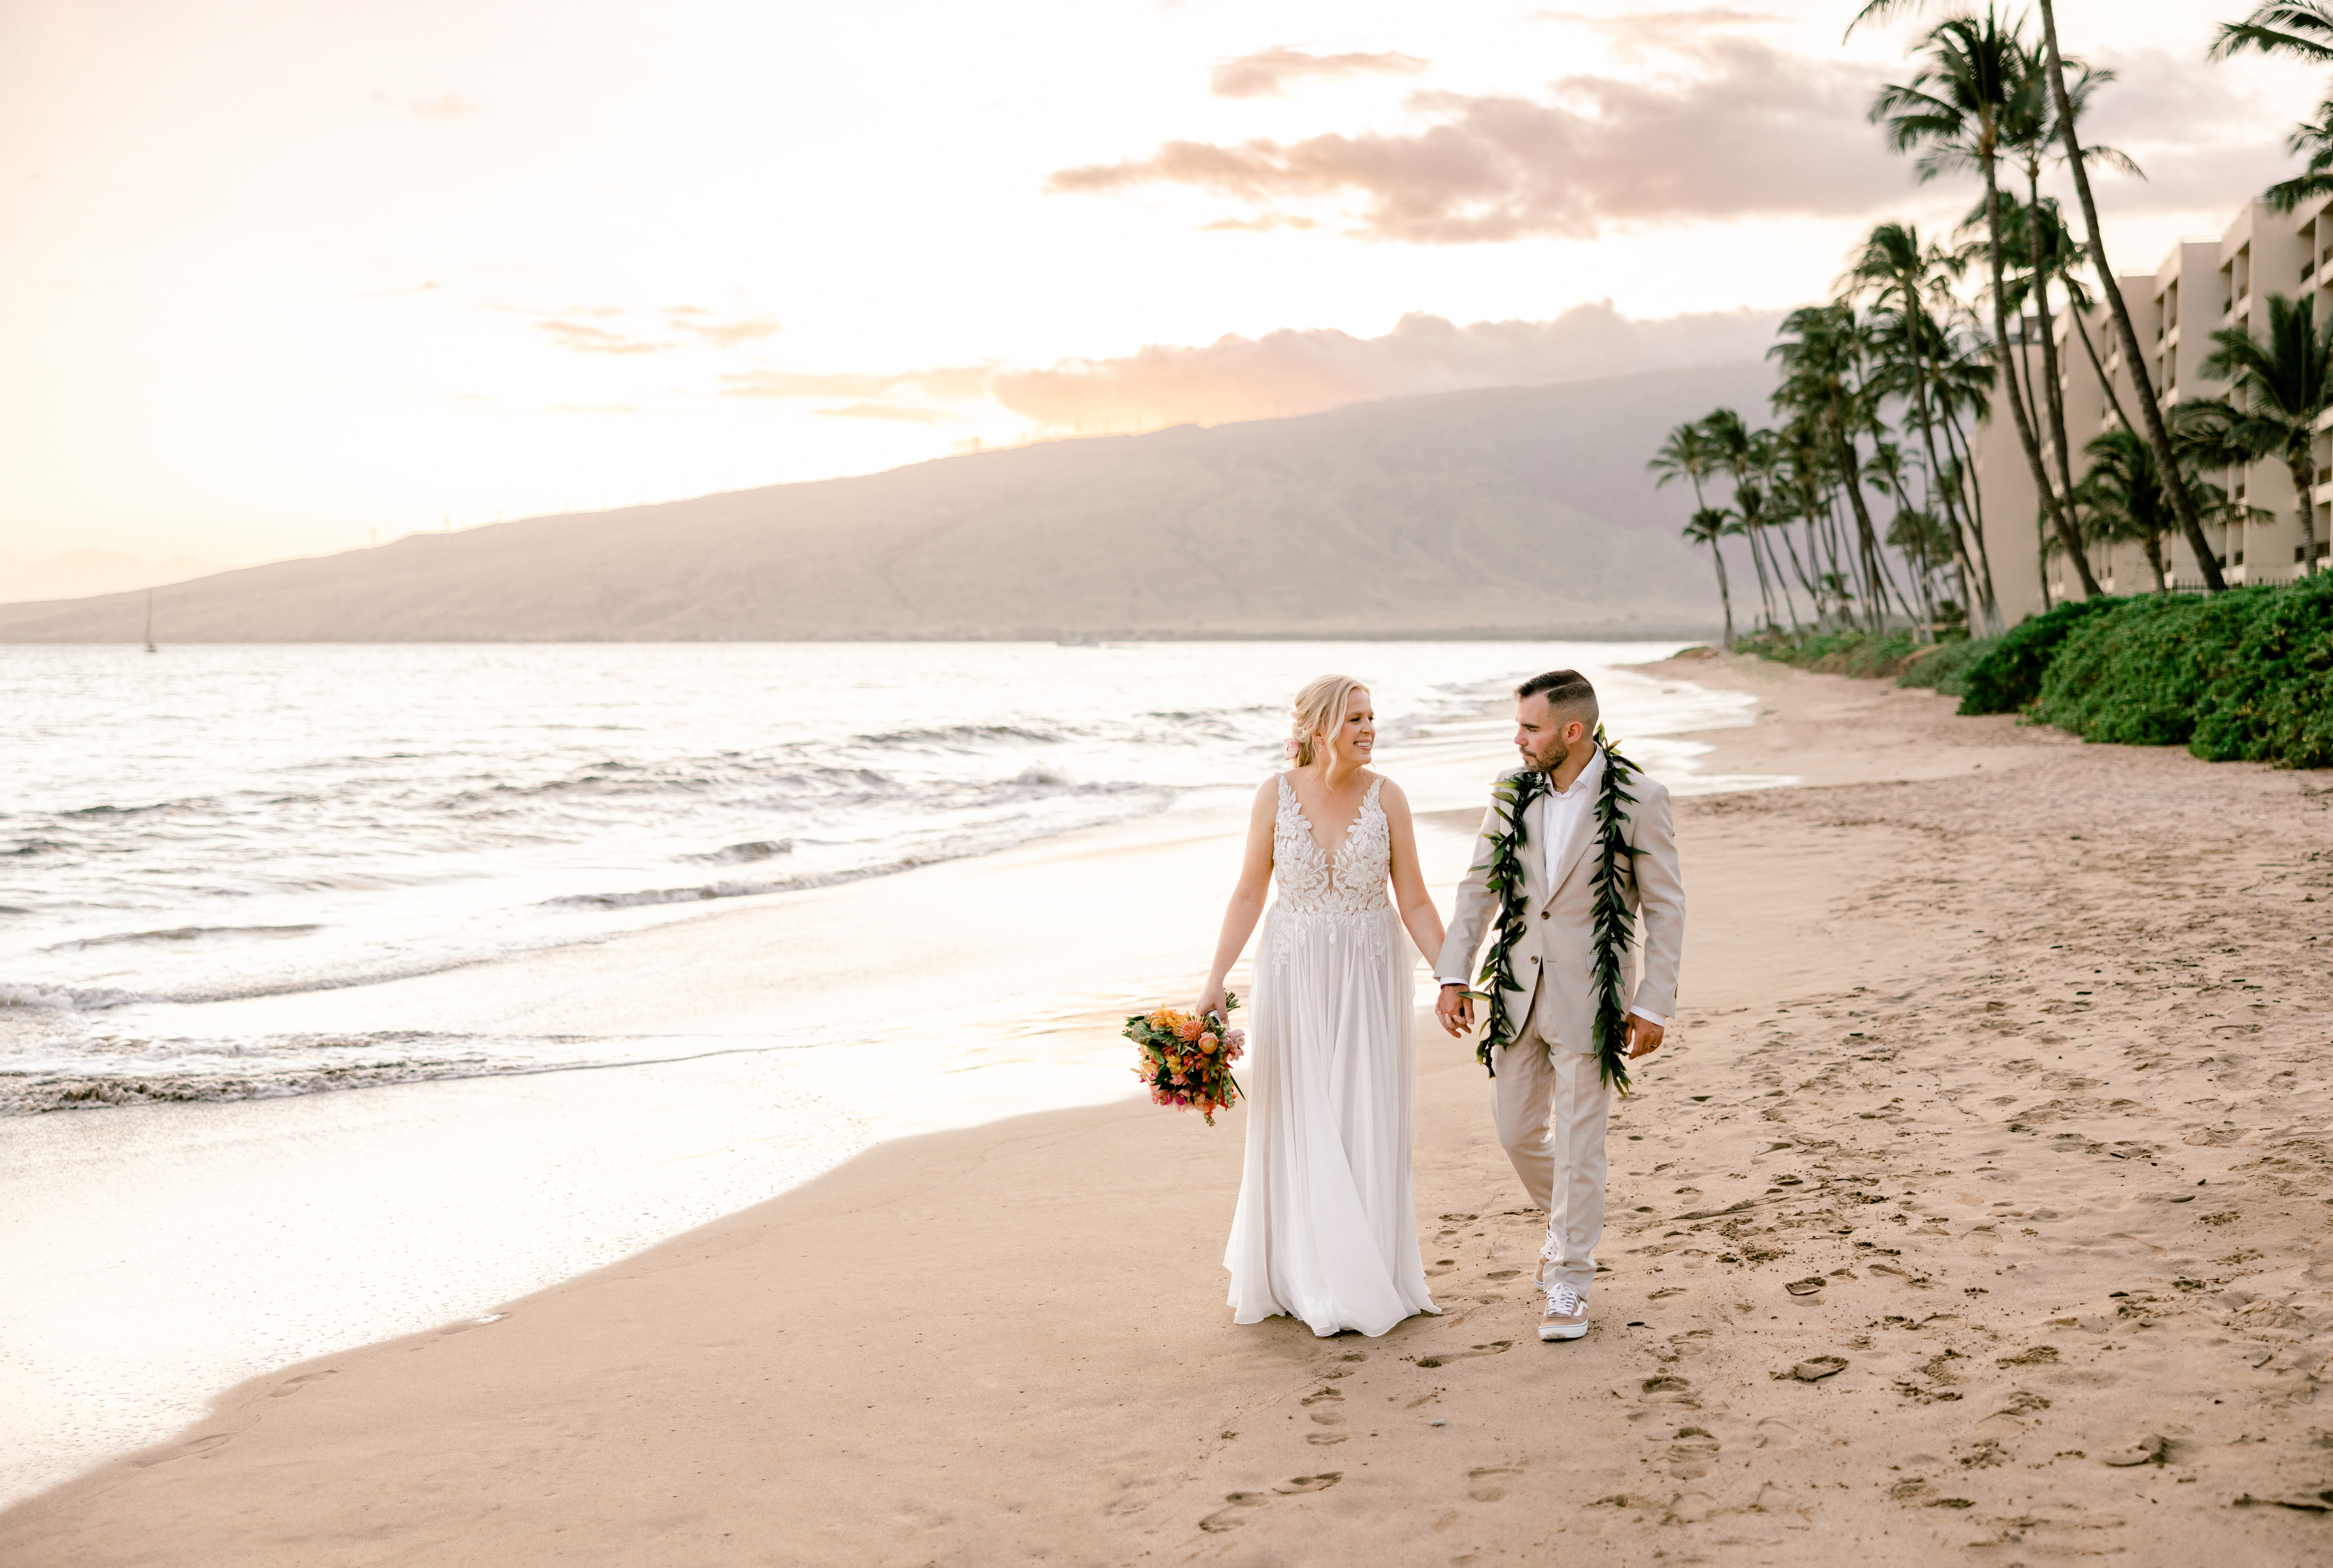 Woman and man holding hands while walking in sand at a beach in Hawaii during sunset.